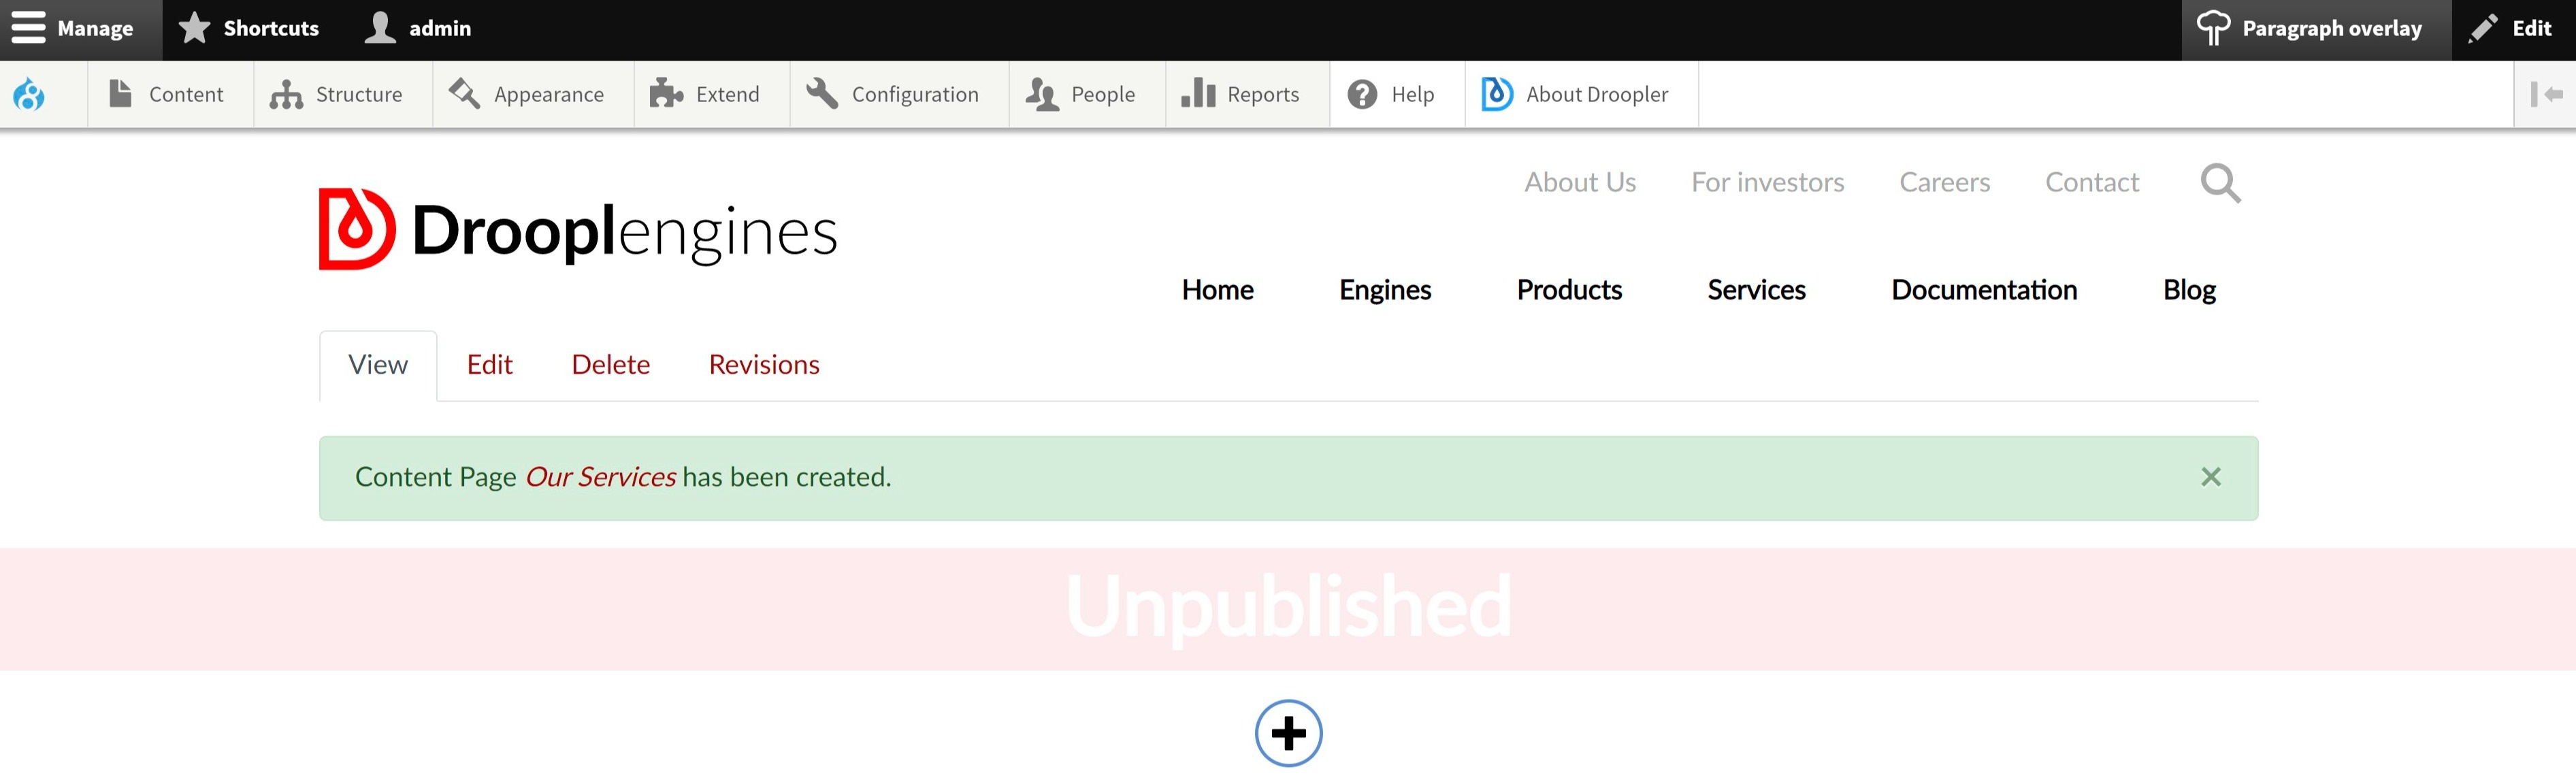 A view after creating a new services page in Droopler